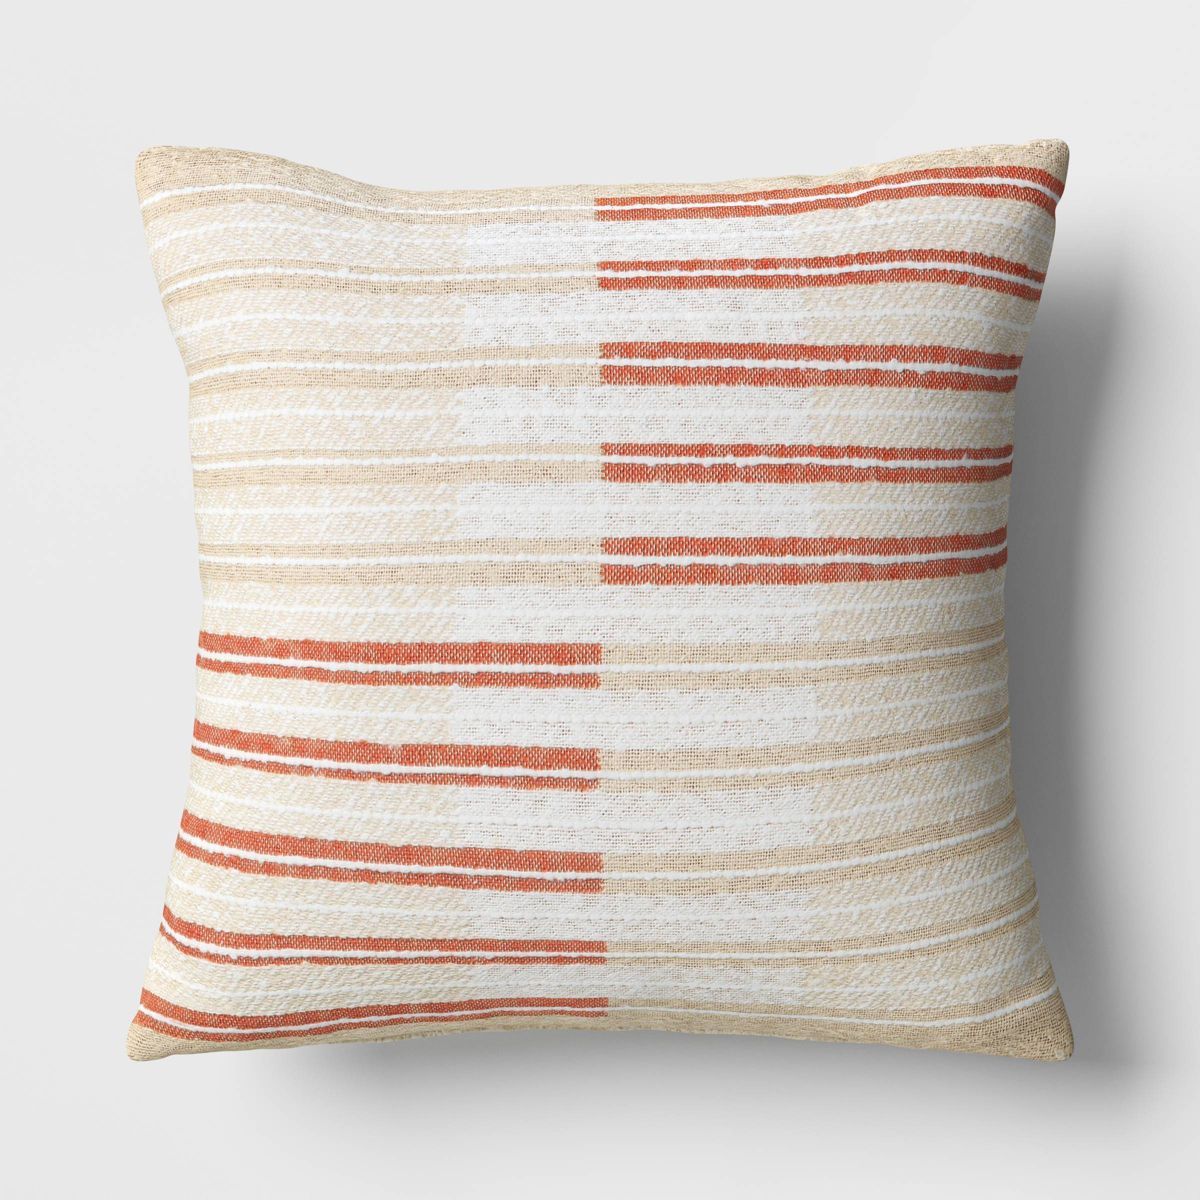 Woven Striped Textured Square Throw Pillow - Threshold™ | Target